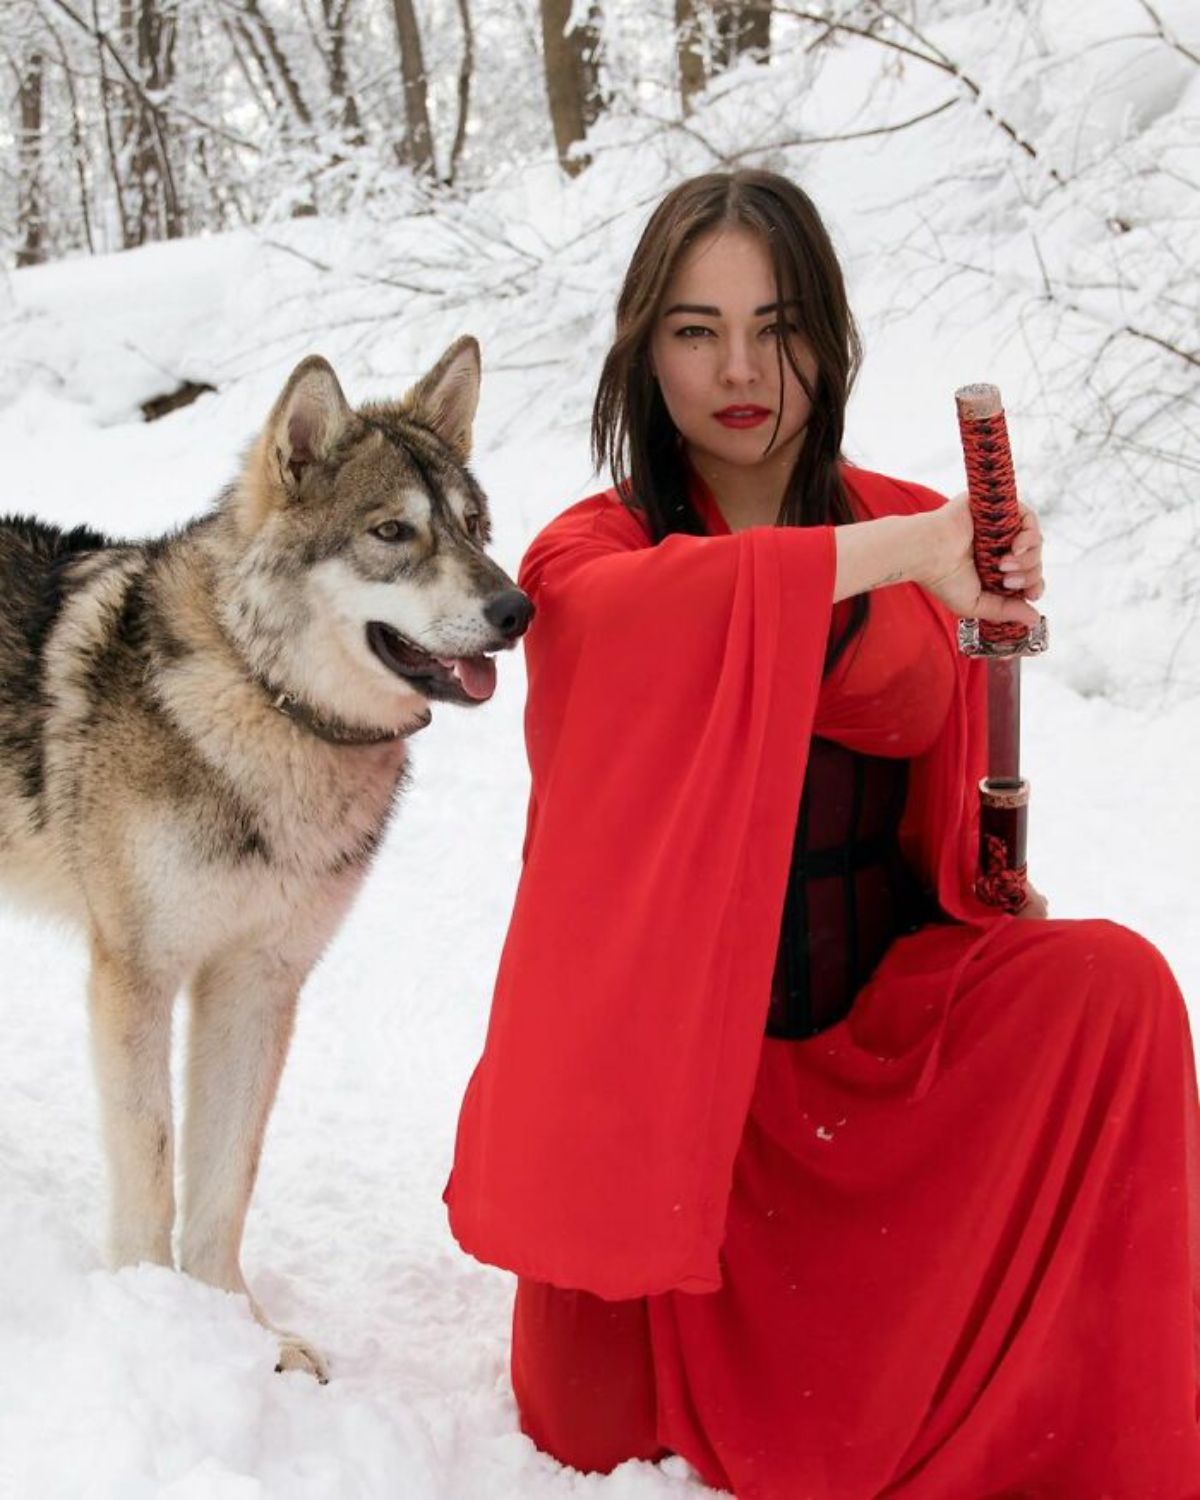 wolf standing in snow next to a woman wearing red holding a sword in the snow facing right